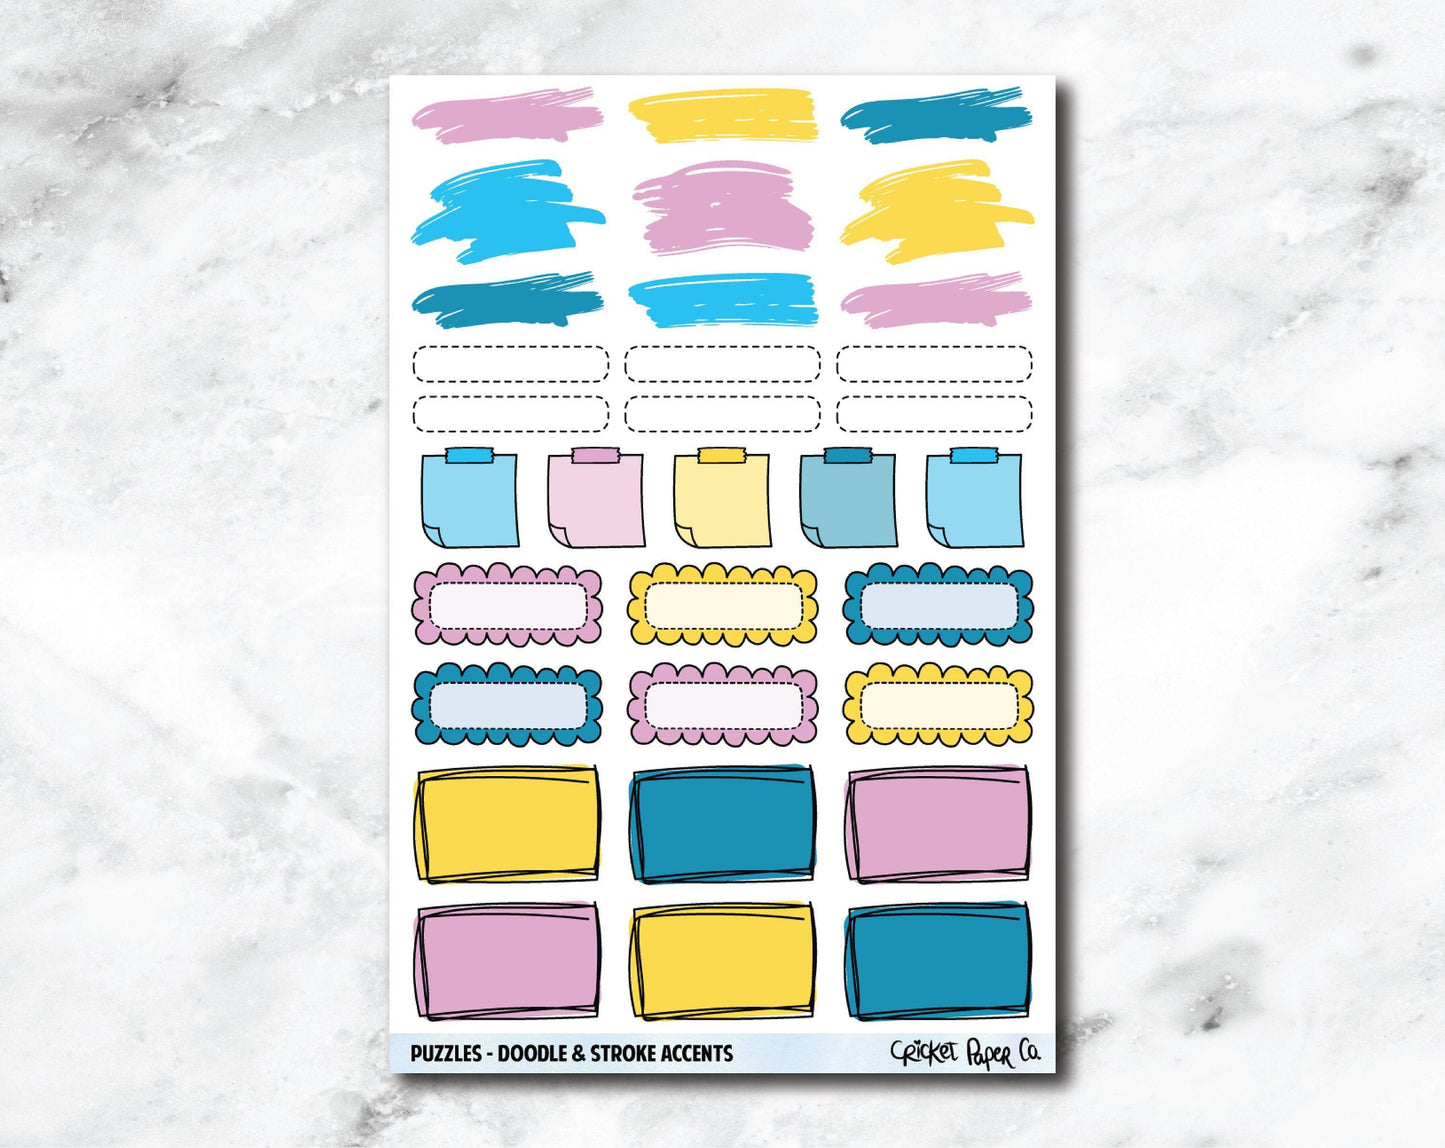 Doodle & Stroke Accents Planner Stickers - Puzzles-Cricket Paper Co.